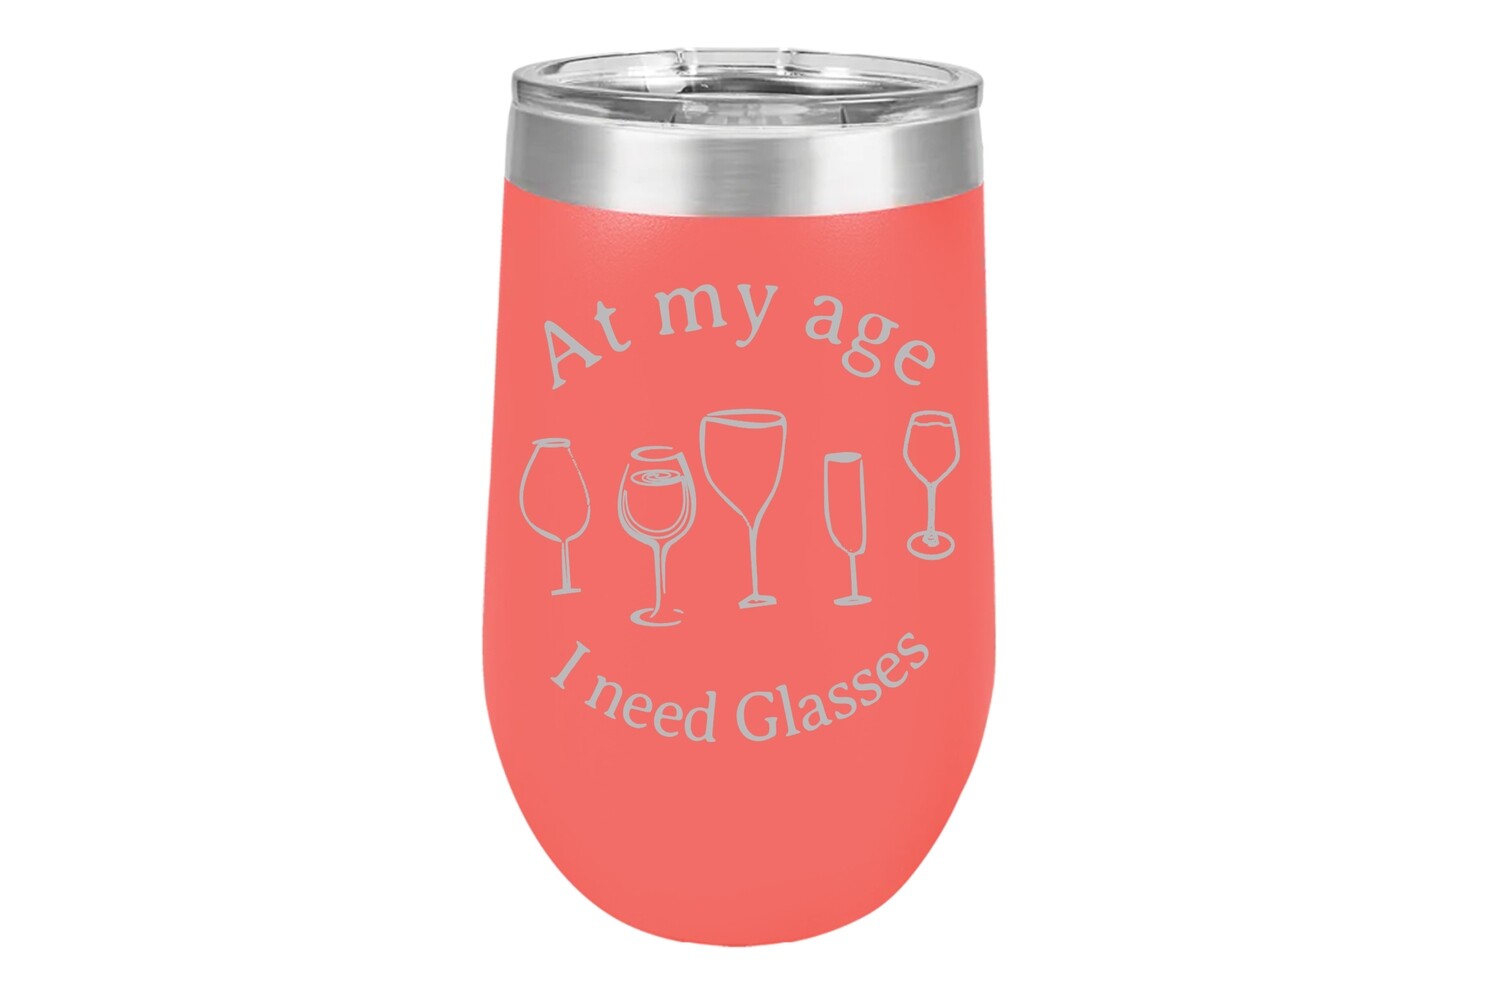 At my age I need Glasses 16 oz Insulated Tumbler